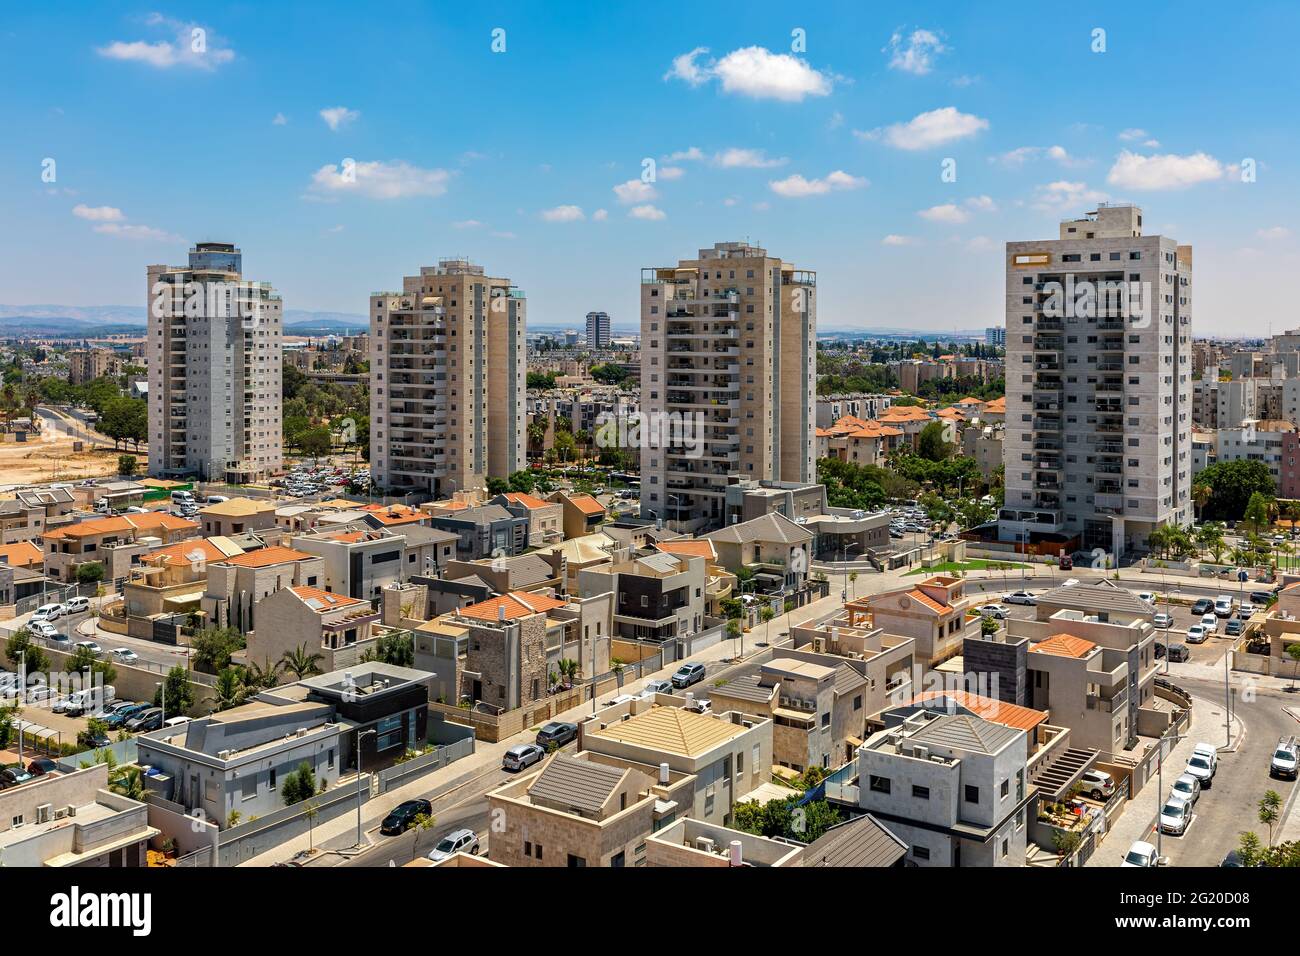 New villas, private houses and residential buildings under blue sky in a new neighborhood of city of Kiryat Gat, Israel. Stock Photo